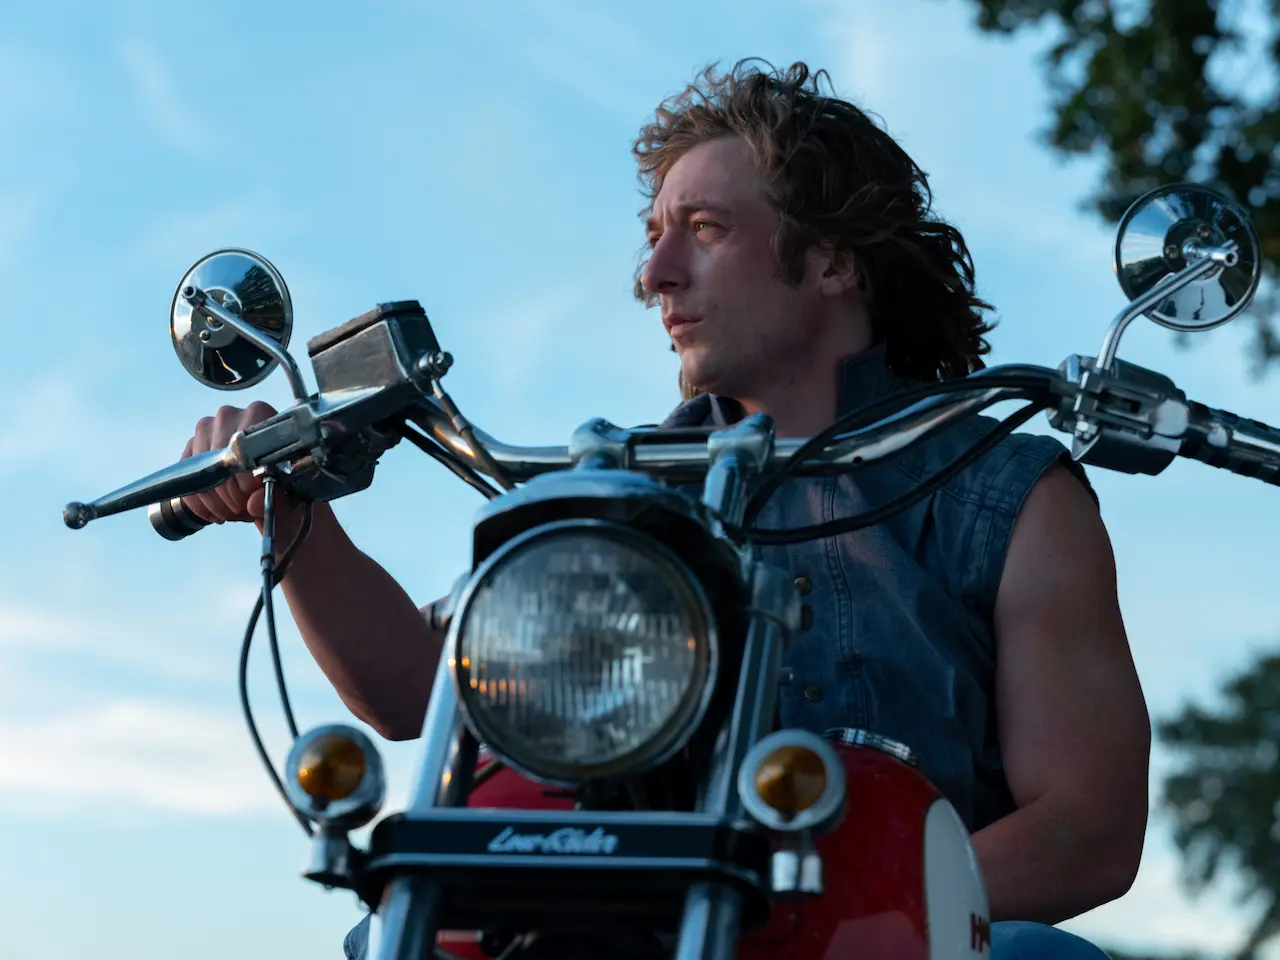 Jeremy Allen White in The Warrior - The Iron Claw